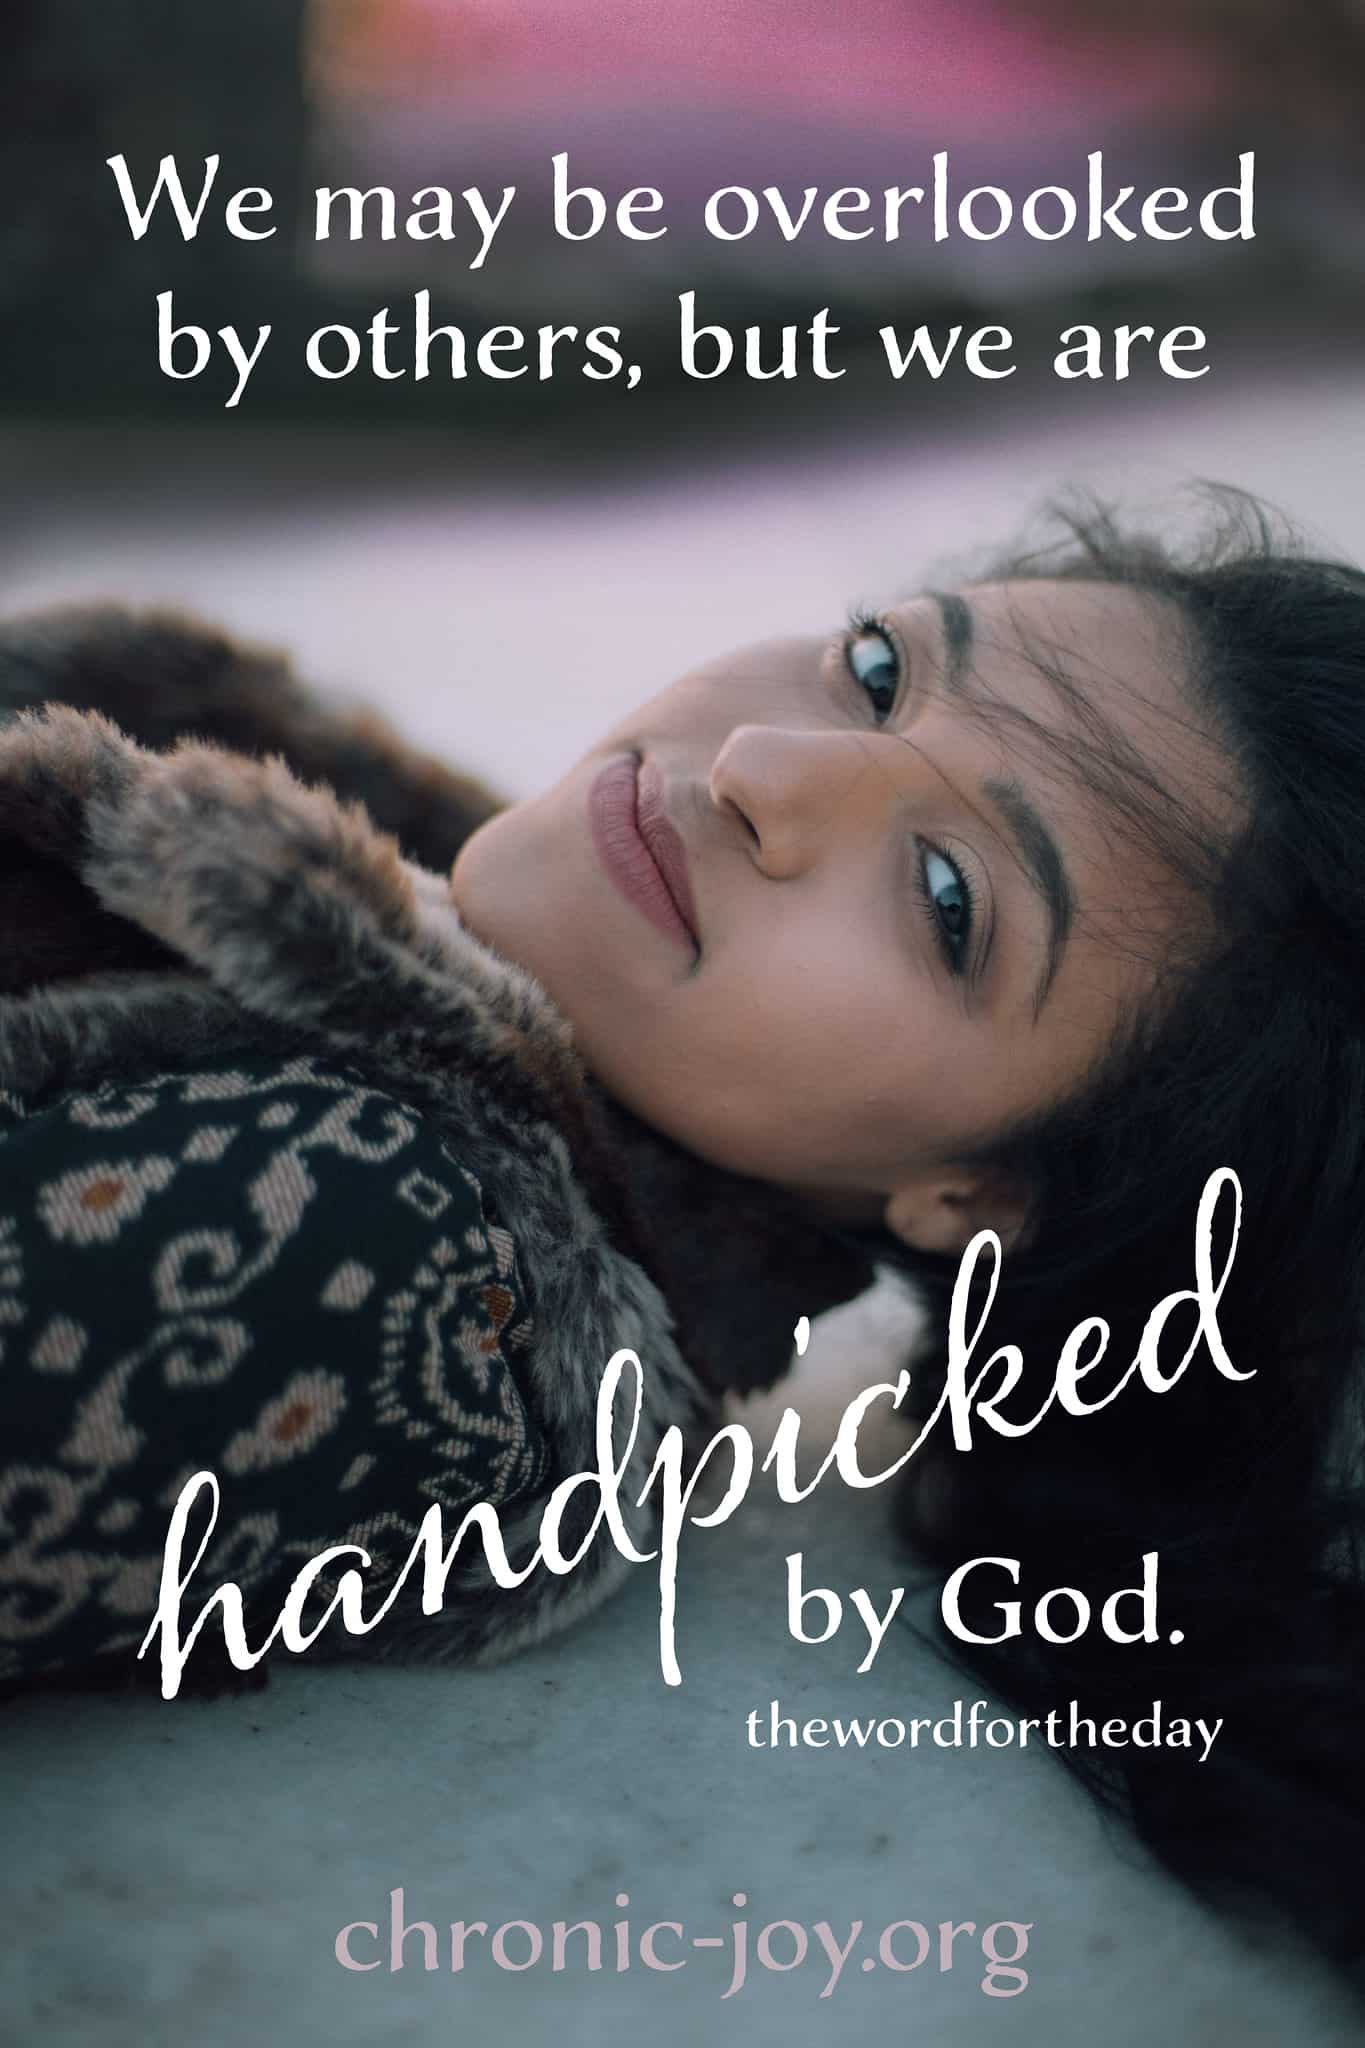 We might be overlooked by others, but we are handpicked by God.